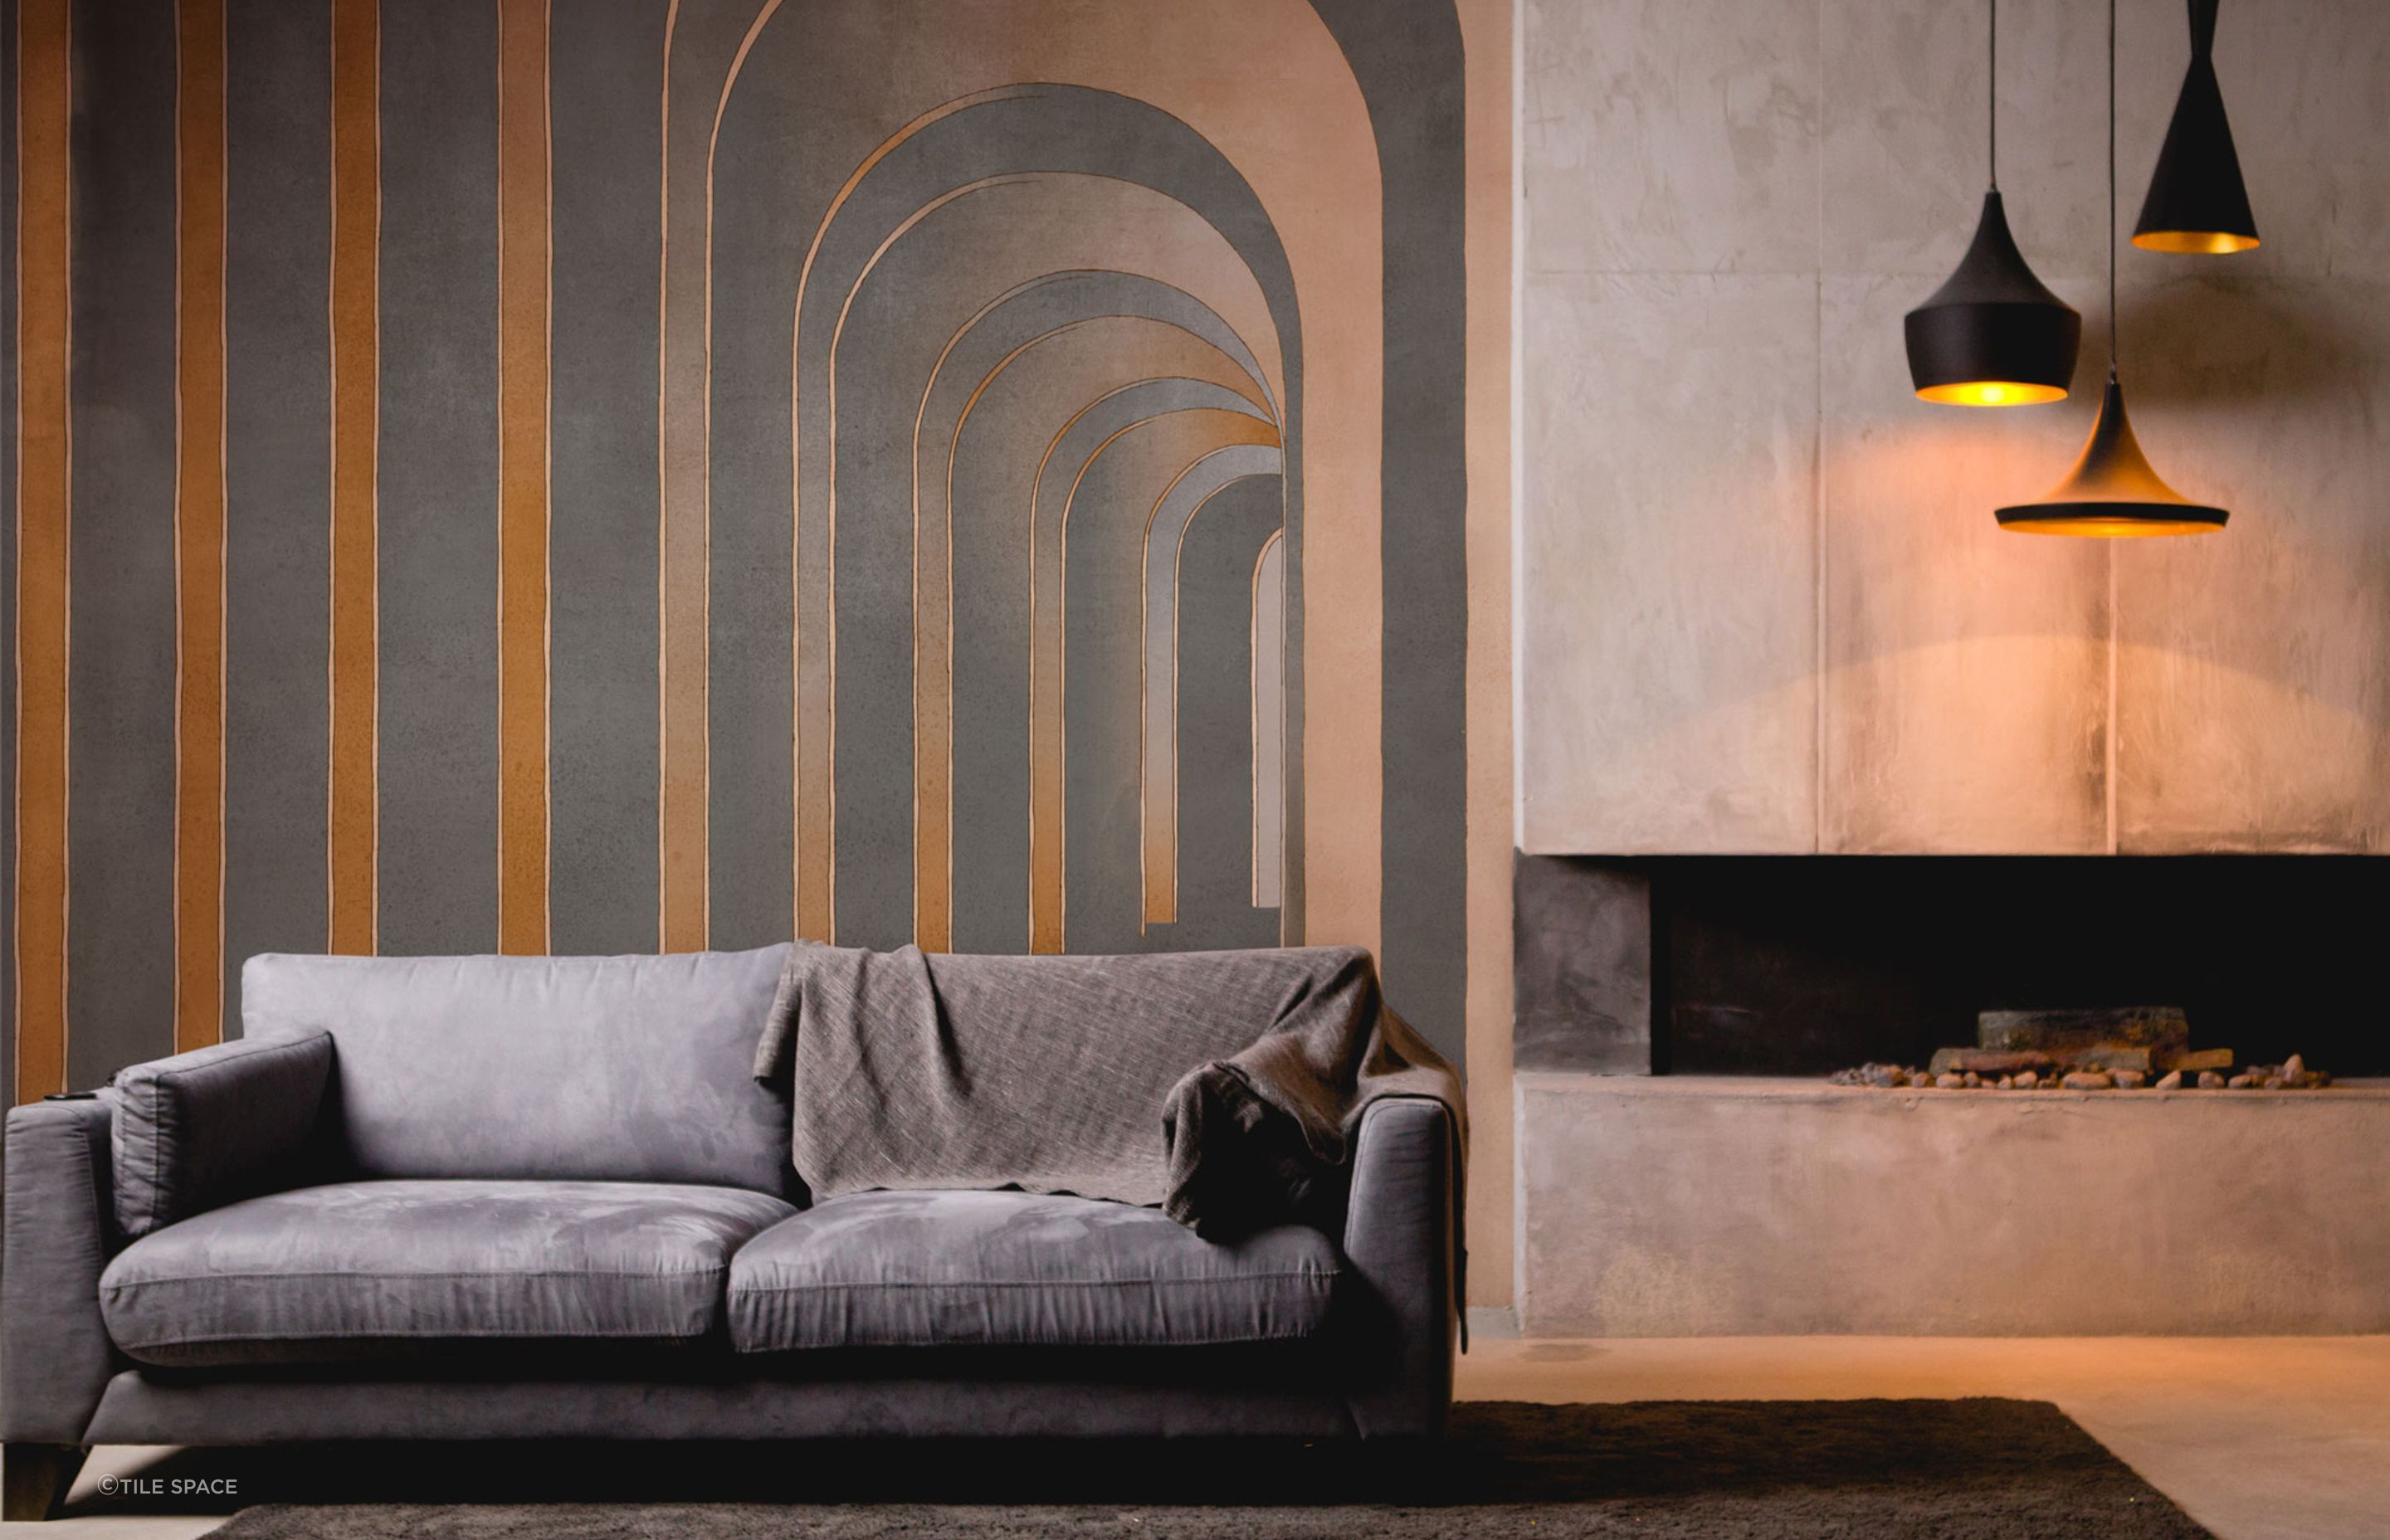 A unique wall covering, like the compelling Technografica Italian Wallpaper, can make a great feature wall for your lounge.